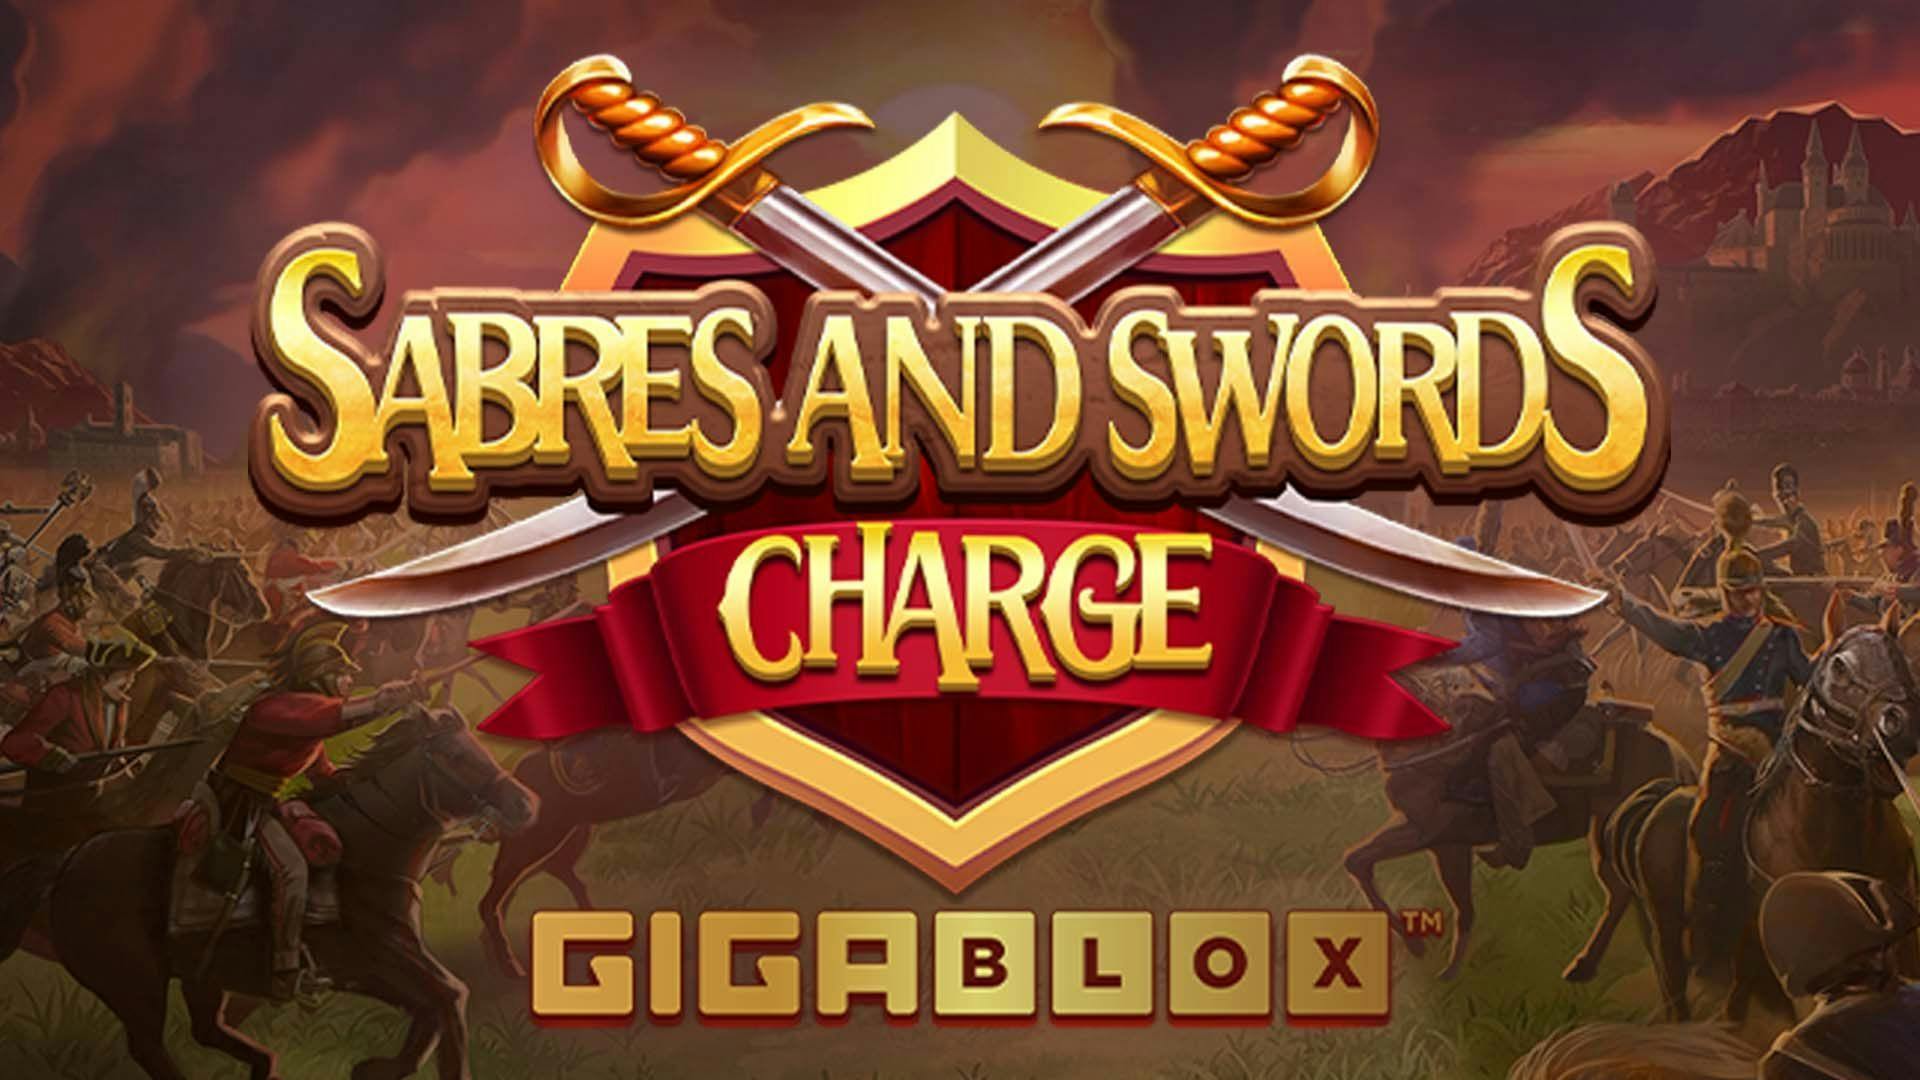 Sabres And Swords Charge Gigablox Slot Online Free Play